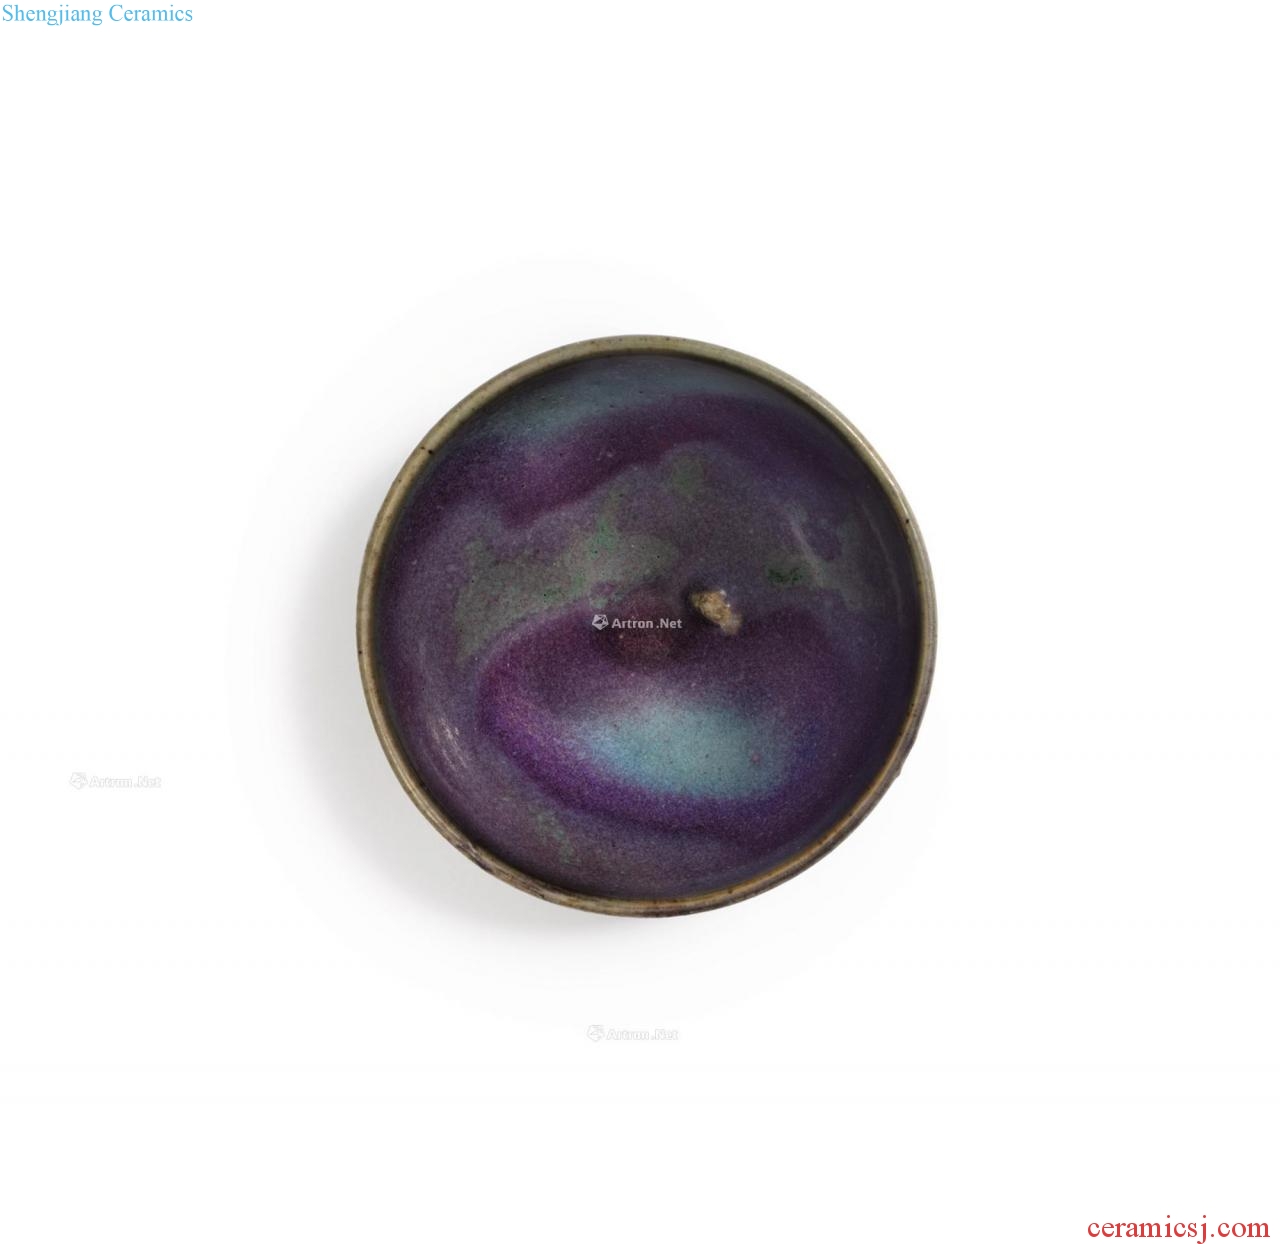 Northern song dynasty/gold The azure glaze purple small 盌 masterpieces